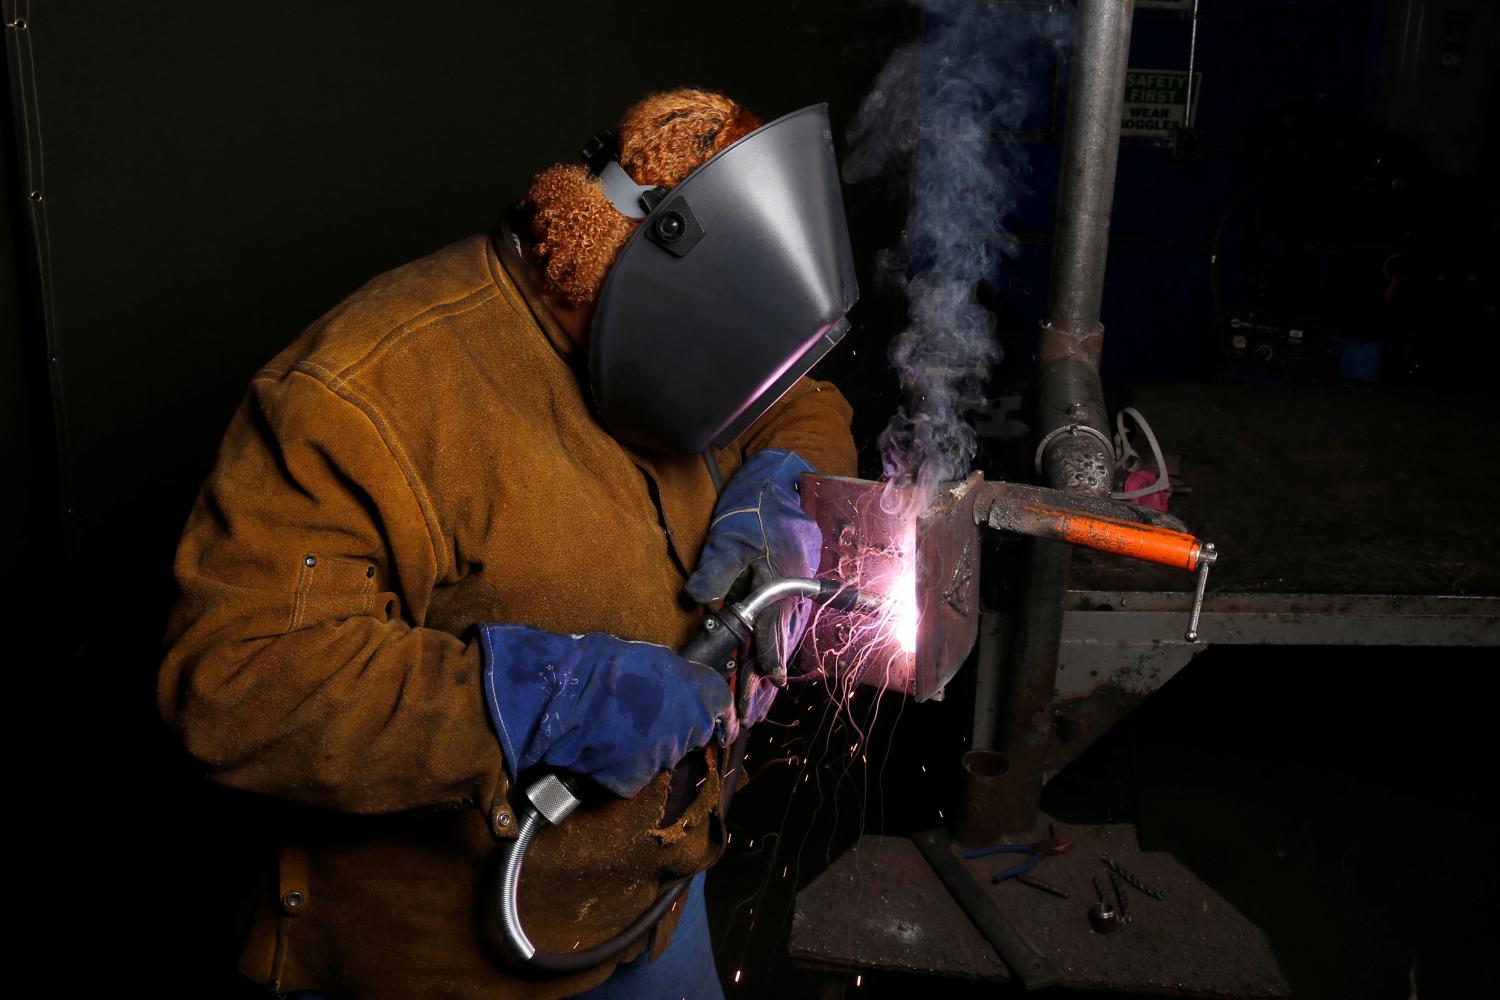 Welding instructor Darlene Thompson, 45, poses for a portrait at Los Angeles Trade-Technical College in Los Angeles, California, United States, June 27, 2016. Only 4.8 percent of U.S. welders were women in 2014, according to the U.S. Department of Labor. Thompson said: "I honestly donÕt care whether it [will] be a woman or a male [president]... What I want is someone who is morally and ethically correct... Right now we need a little peace." Picture taken June 27, 2016. REUTERS/Lucy Nicholson          SEARCH "WOMEN WORKERS" FOR THIS STORY. SEARCH "THE WIDER IMAGE" FOR ALL STORIES      TPX IMAGES OF THE DAY  - S1AETRFYUOAC